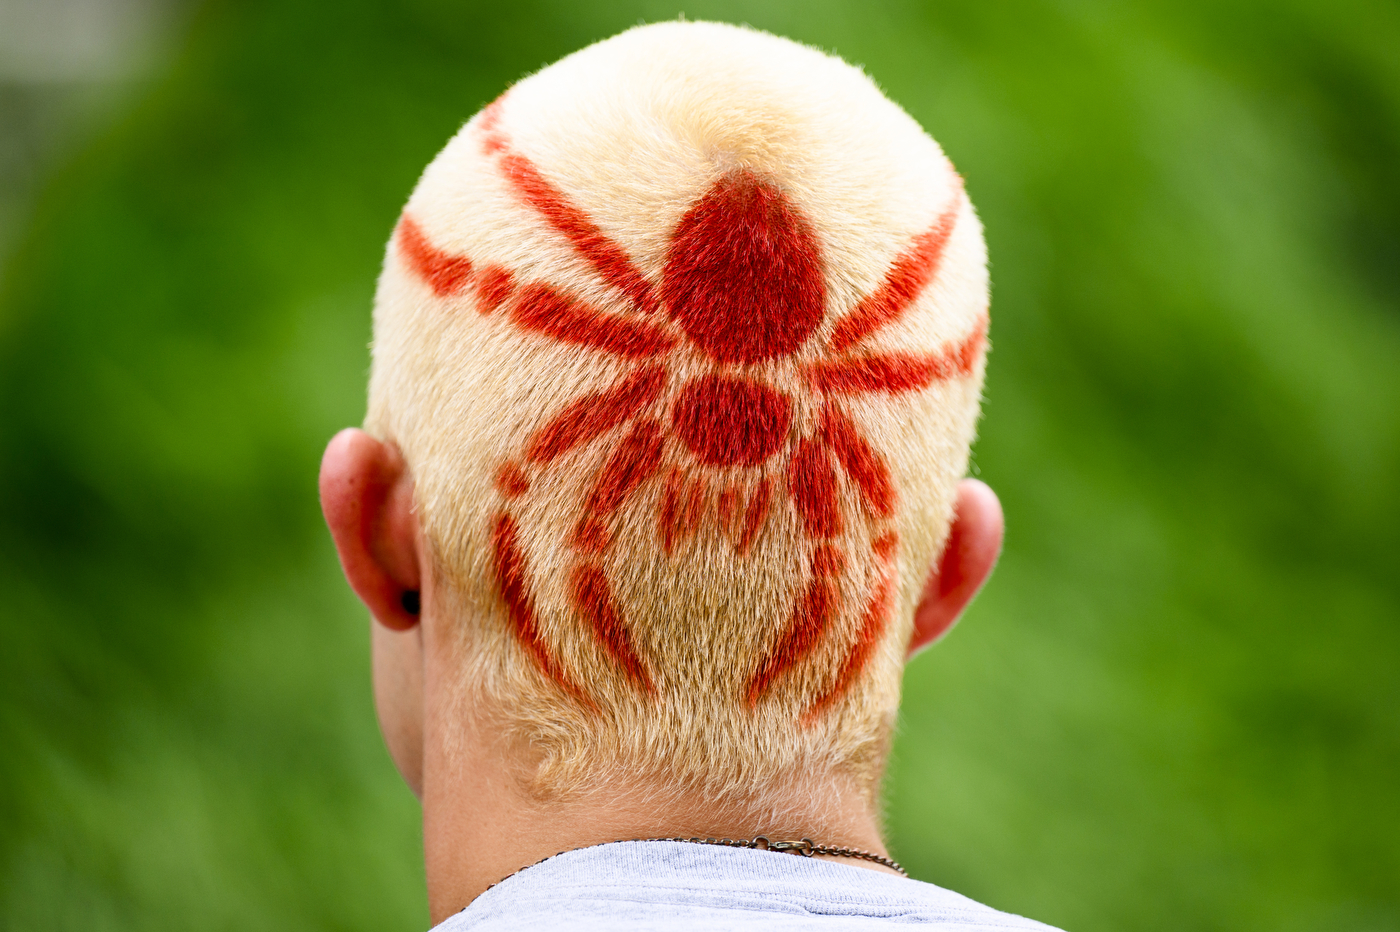 An orange spider design dyed onto the back of someone's blonde hair.